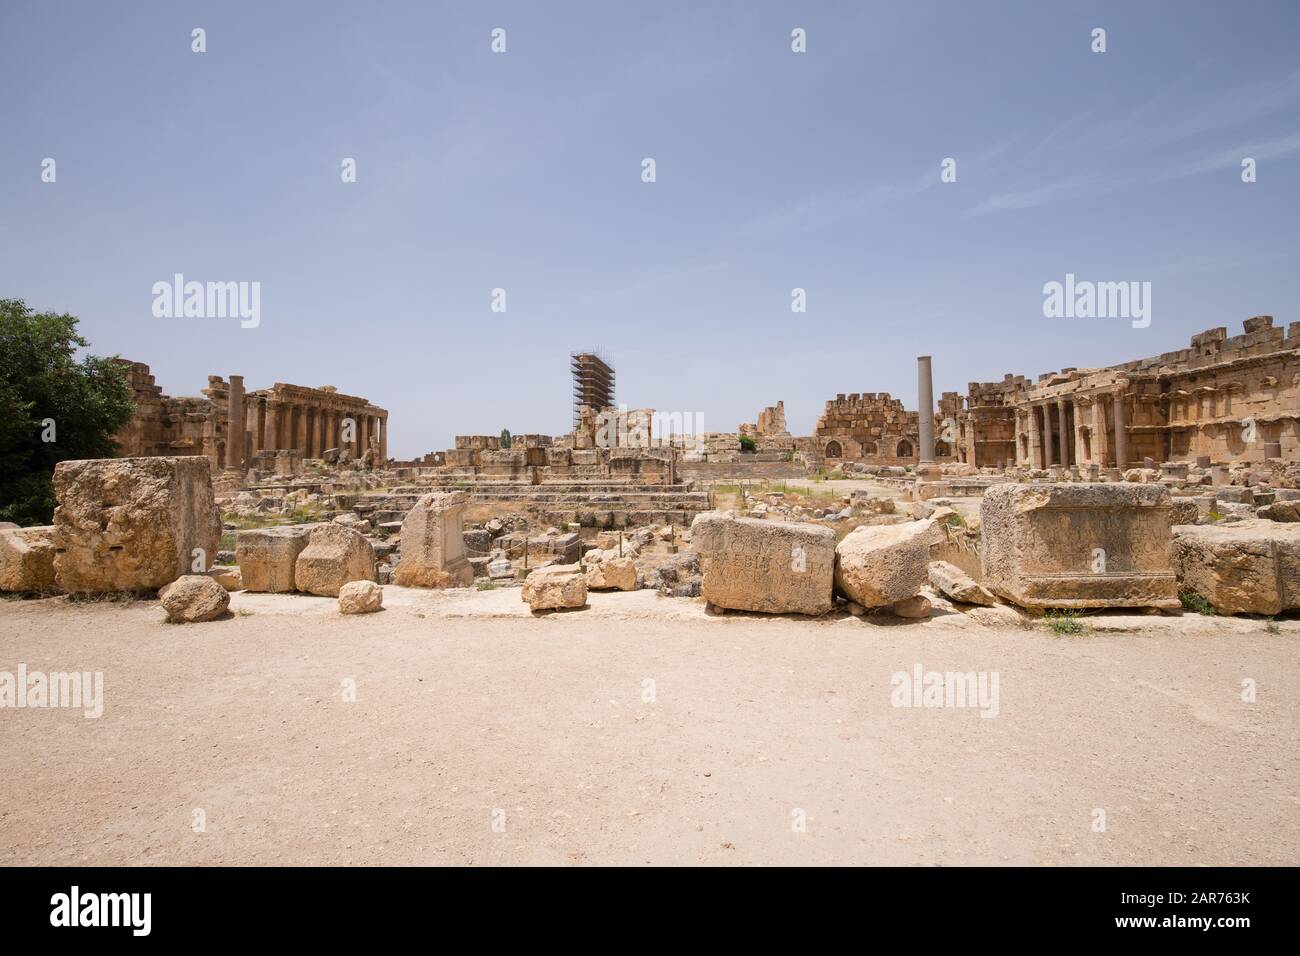 The Great Court. The ruins of the Roman city of Heliopolis or Baalbek in the Beqaa Valley. Baalbek, Lebanon - June, 2019 Stock Photo